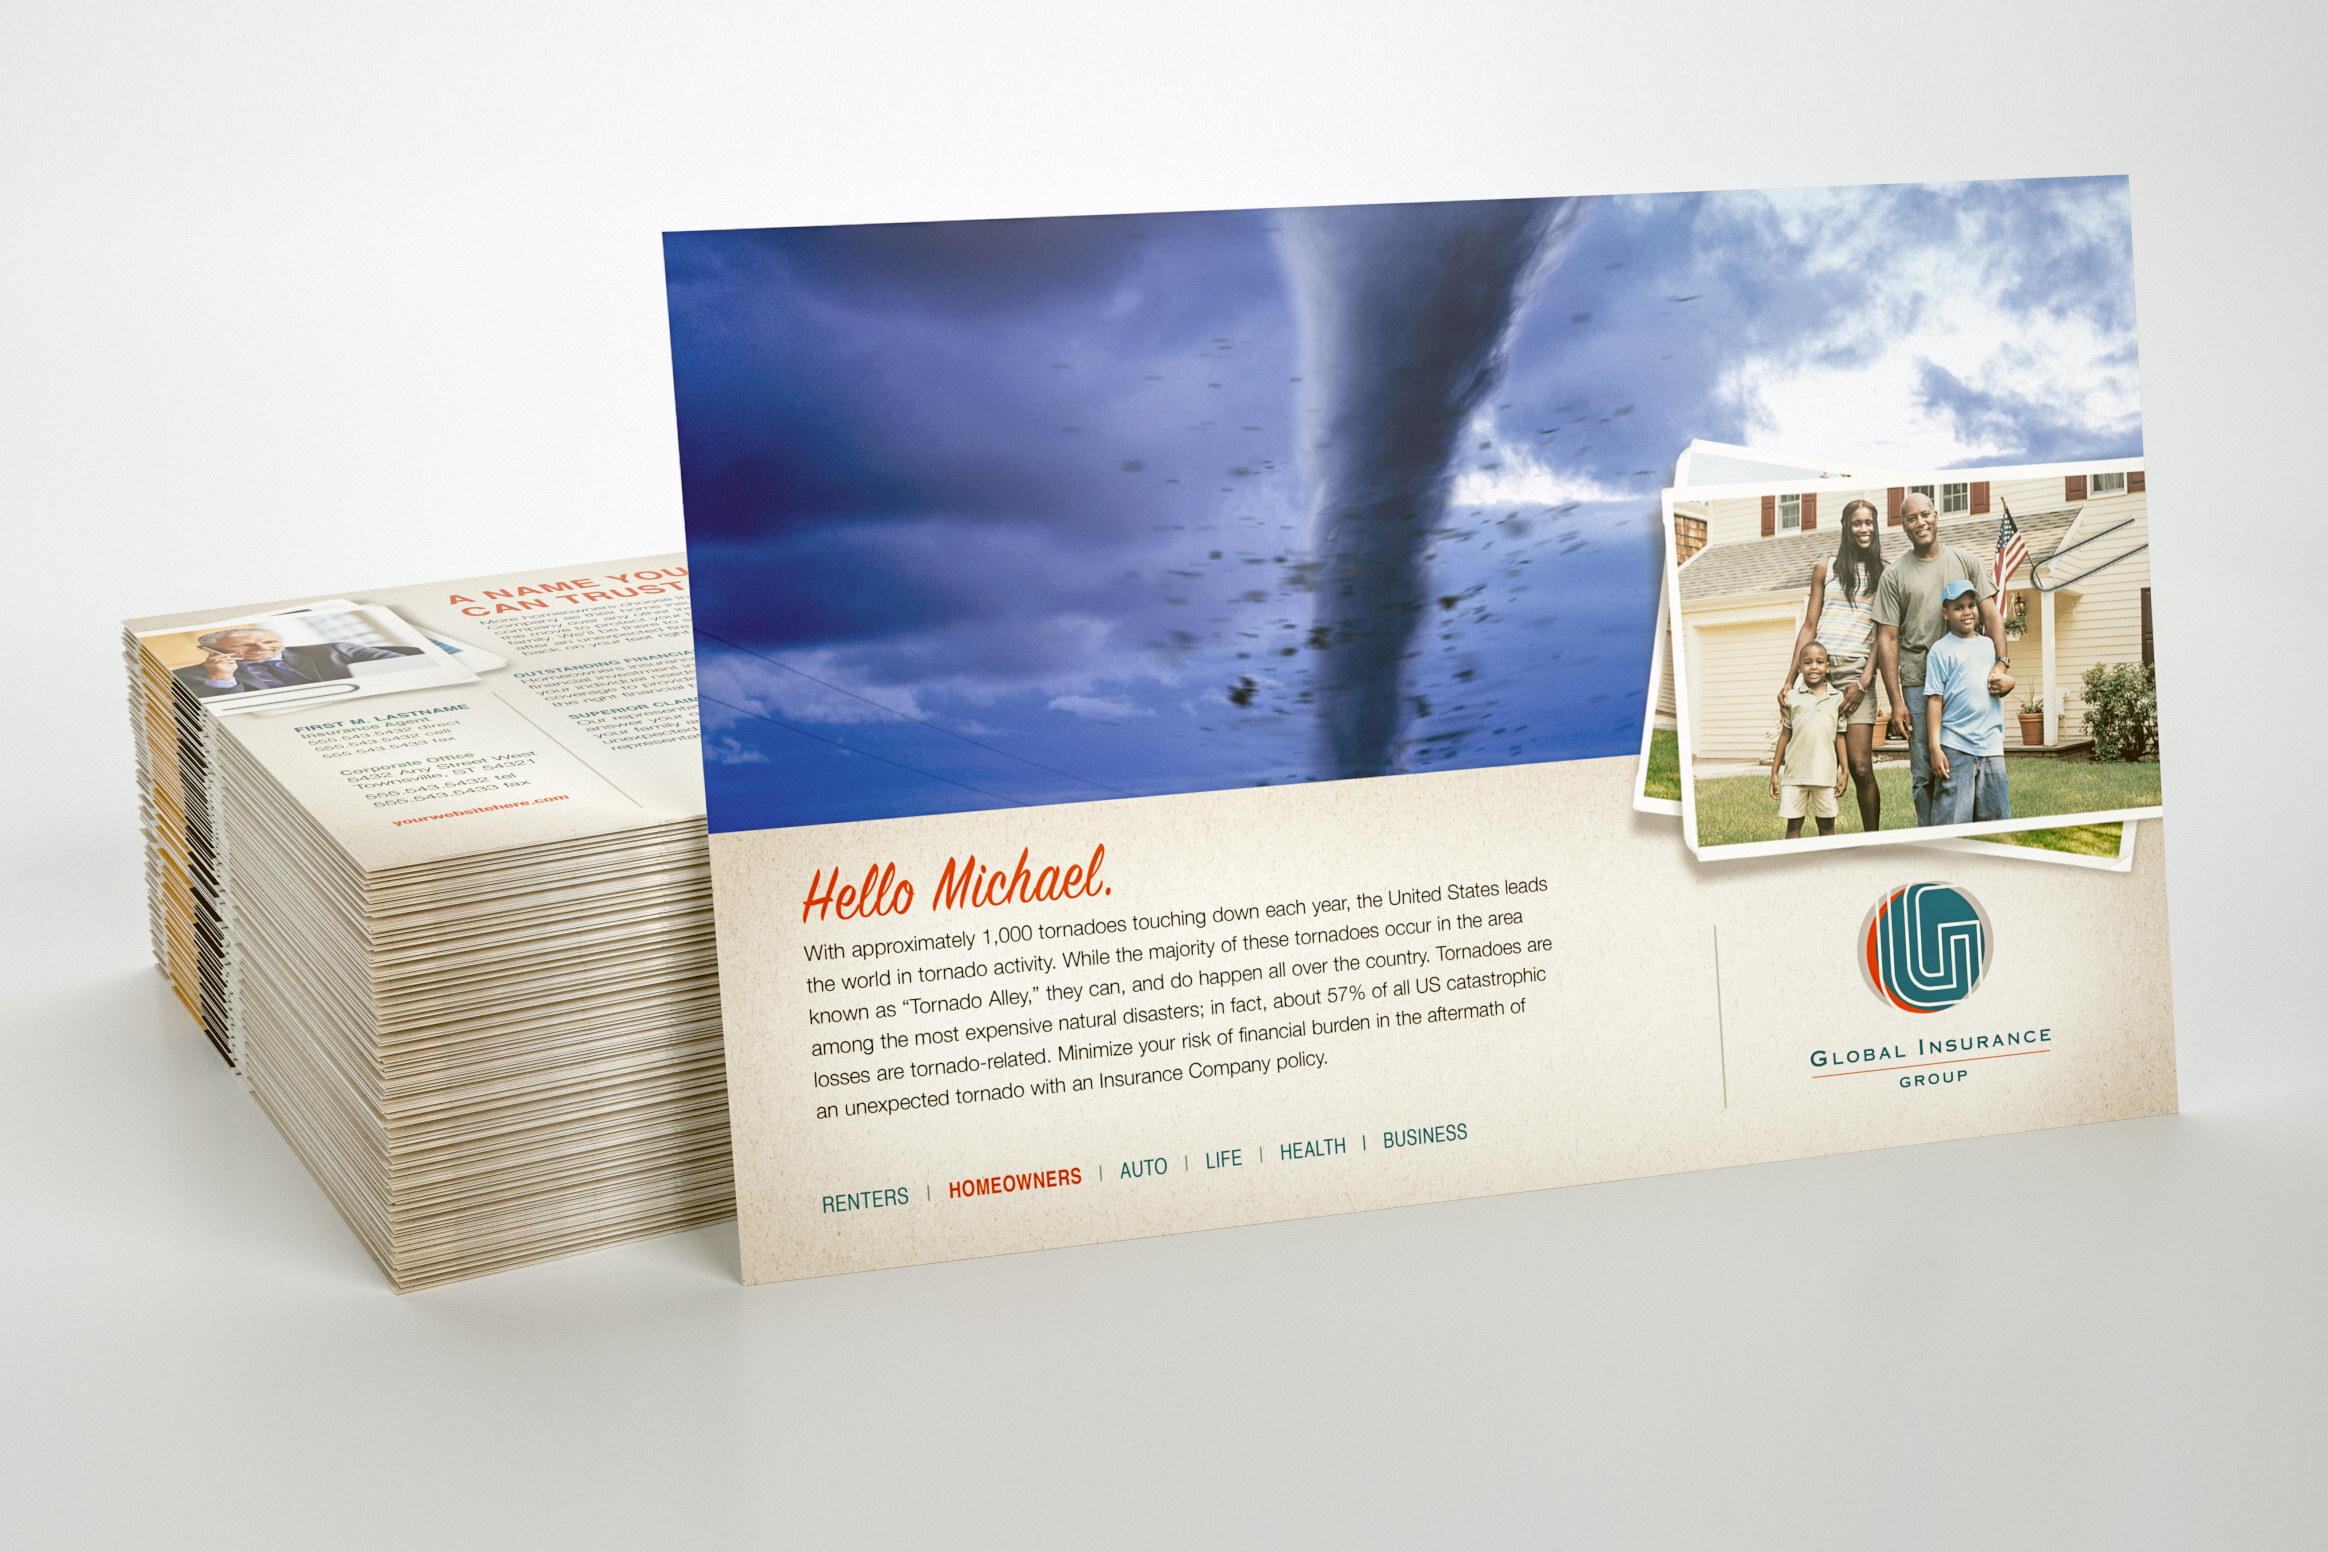 Full Color PostcardsPrinting, Labels, Signs, Banners, Copies, Promotional Products, Posters, Graphic Design in Midland and the Great Lakes Bay Region